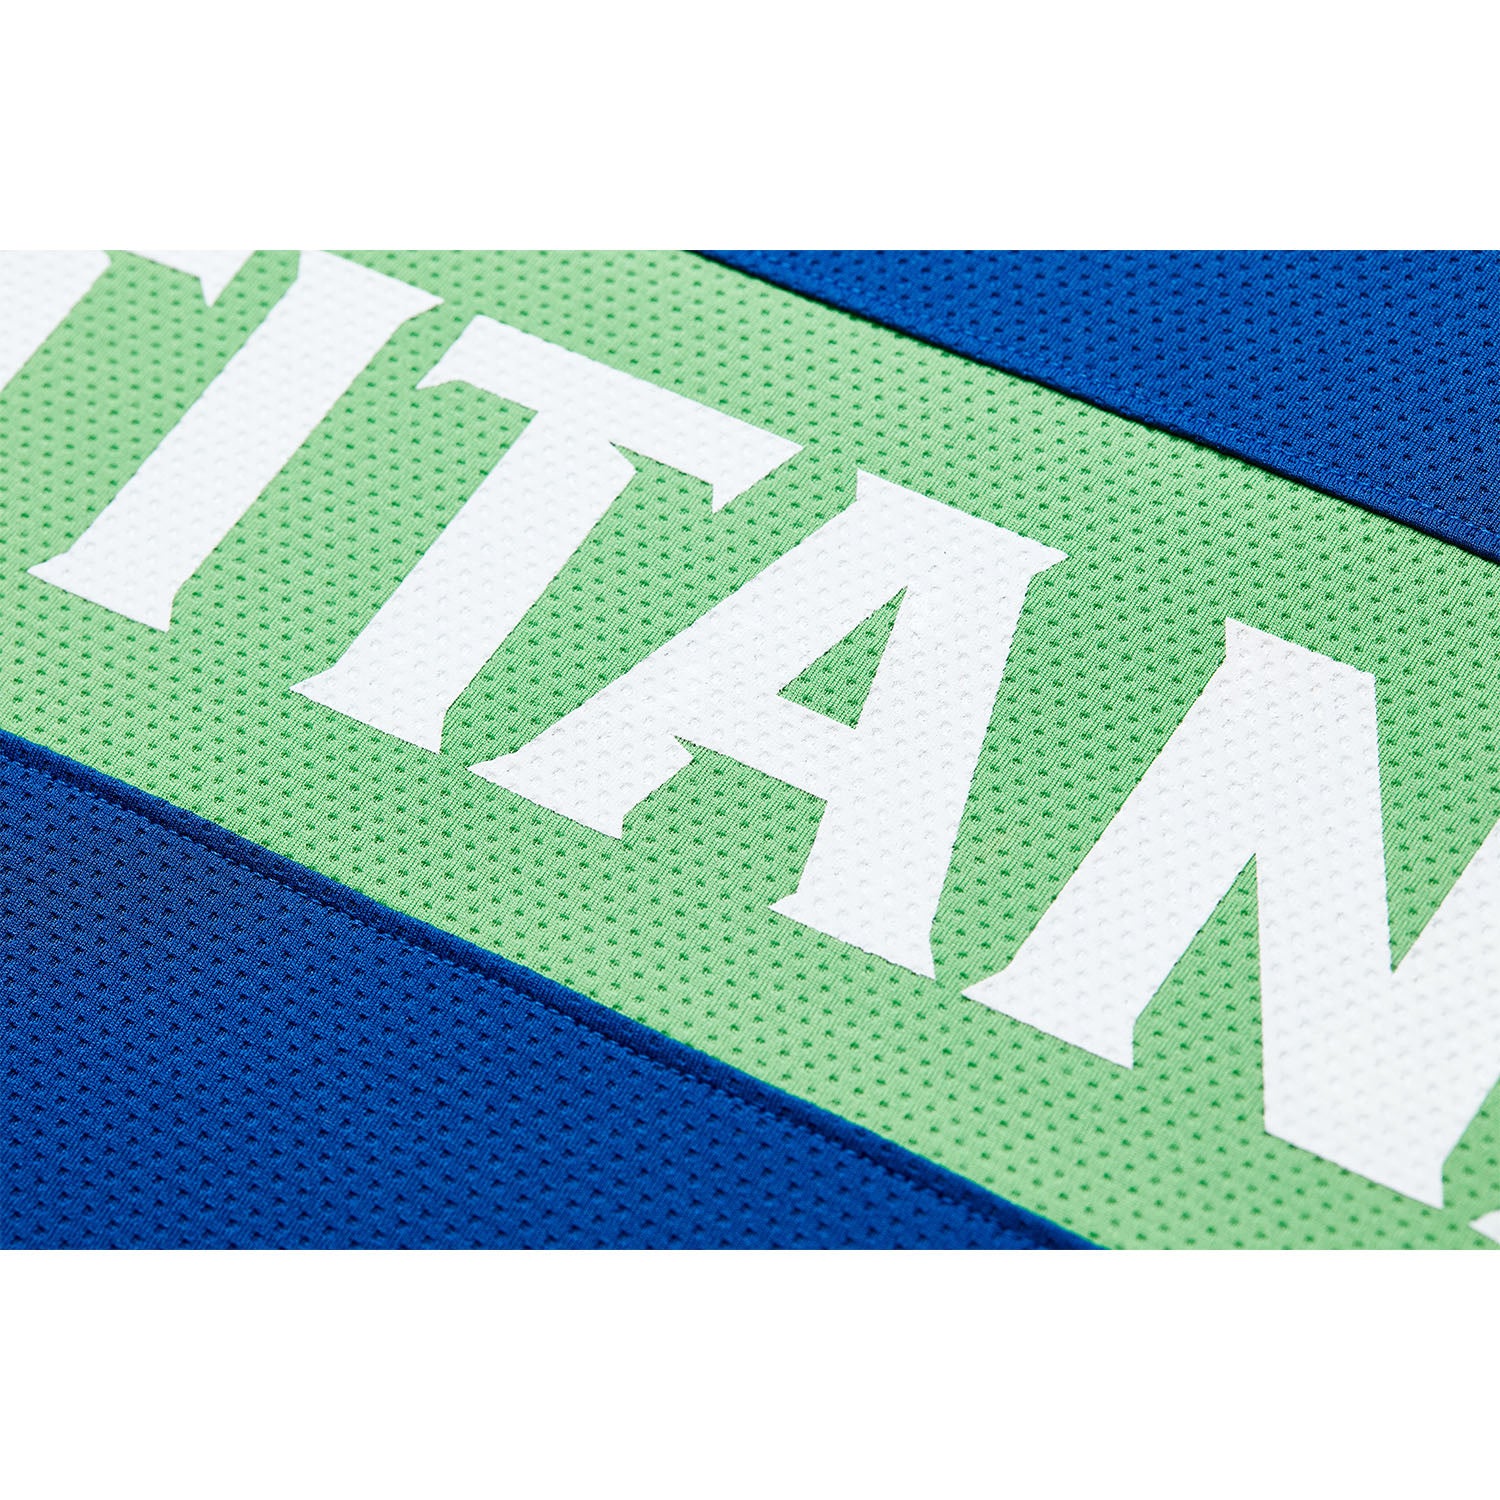 Vancouver Titans Blue Jersey - Team Name View